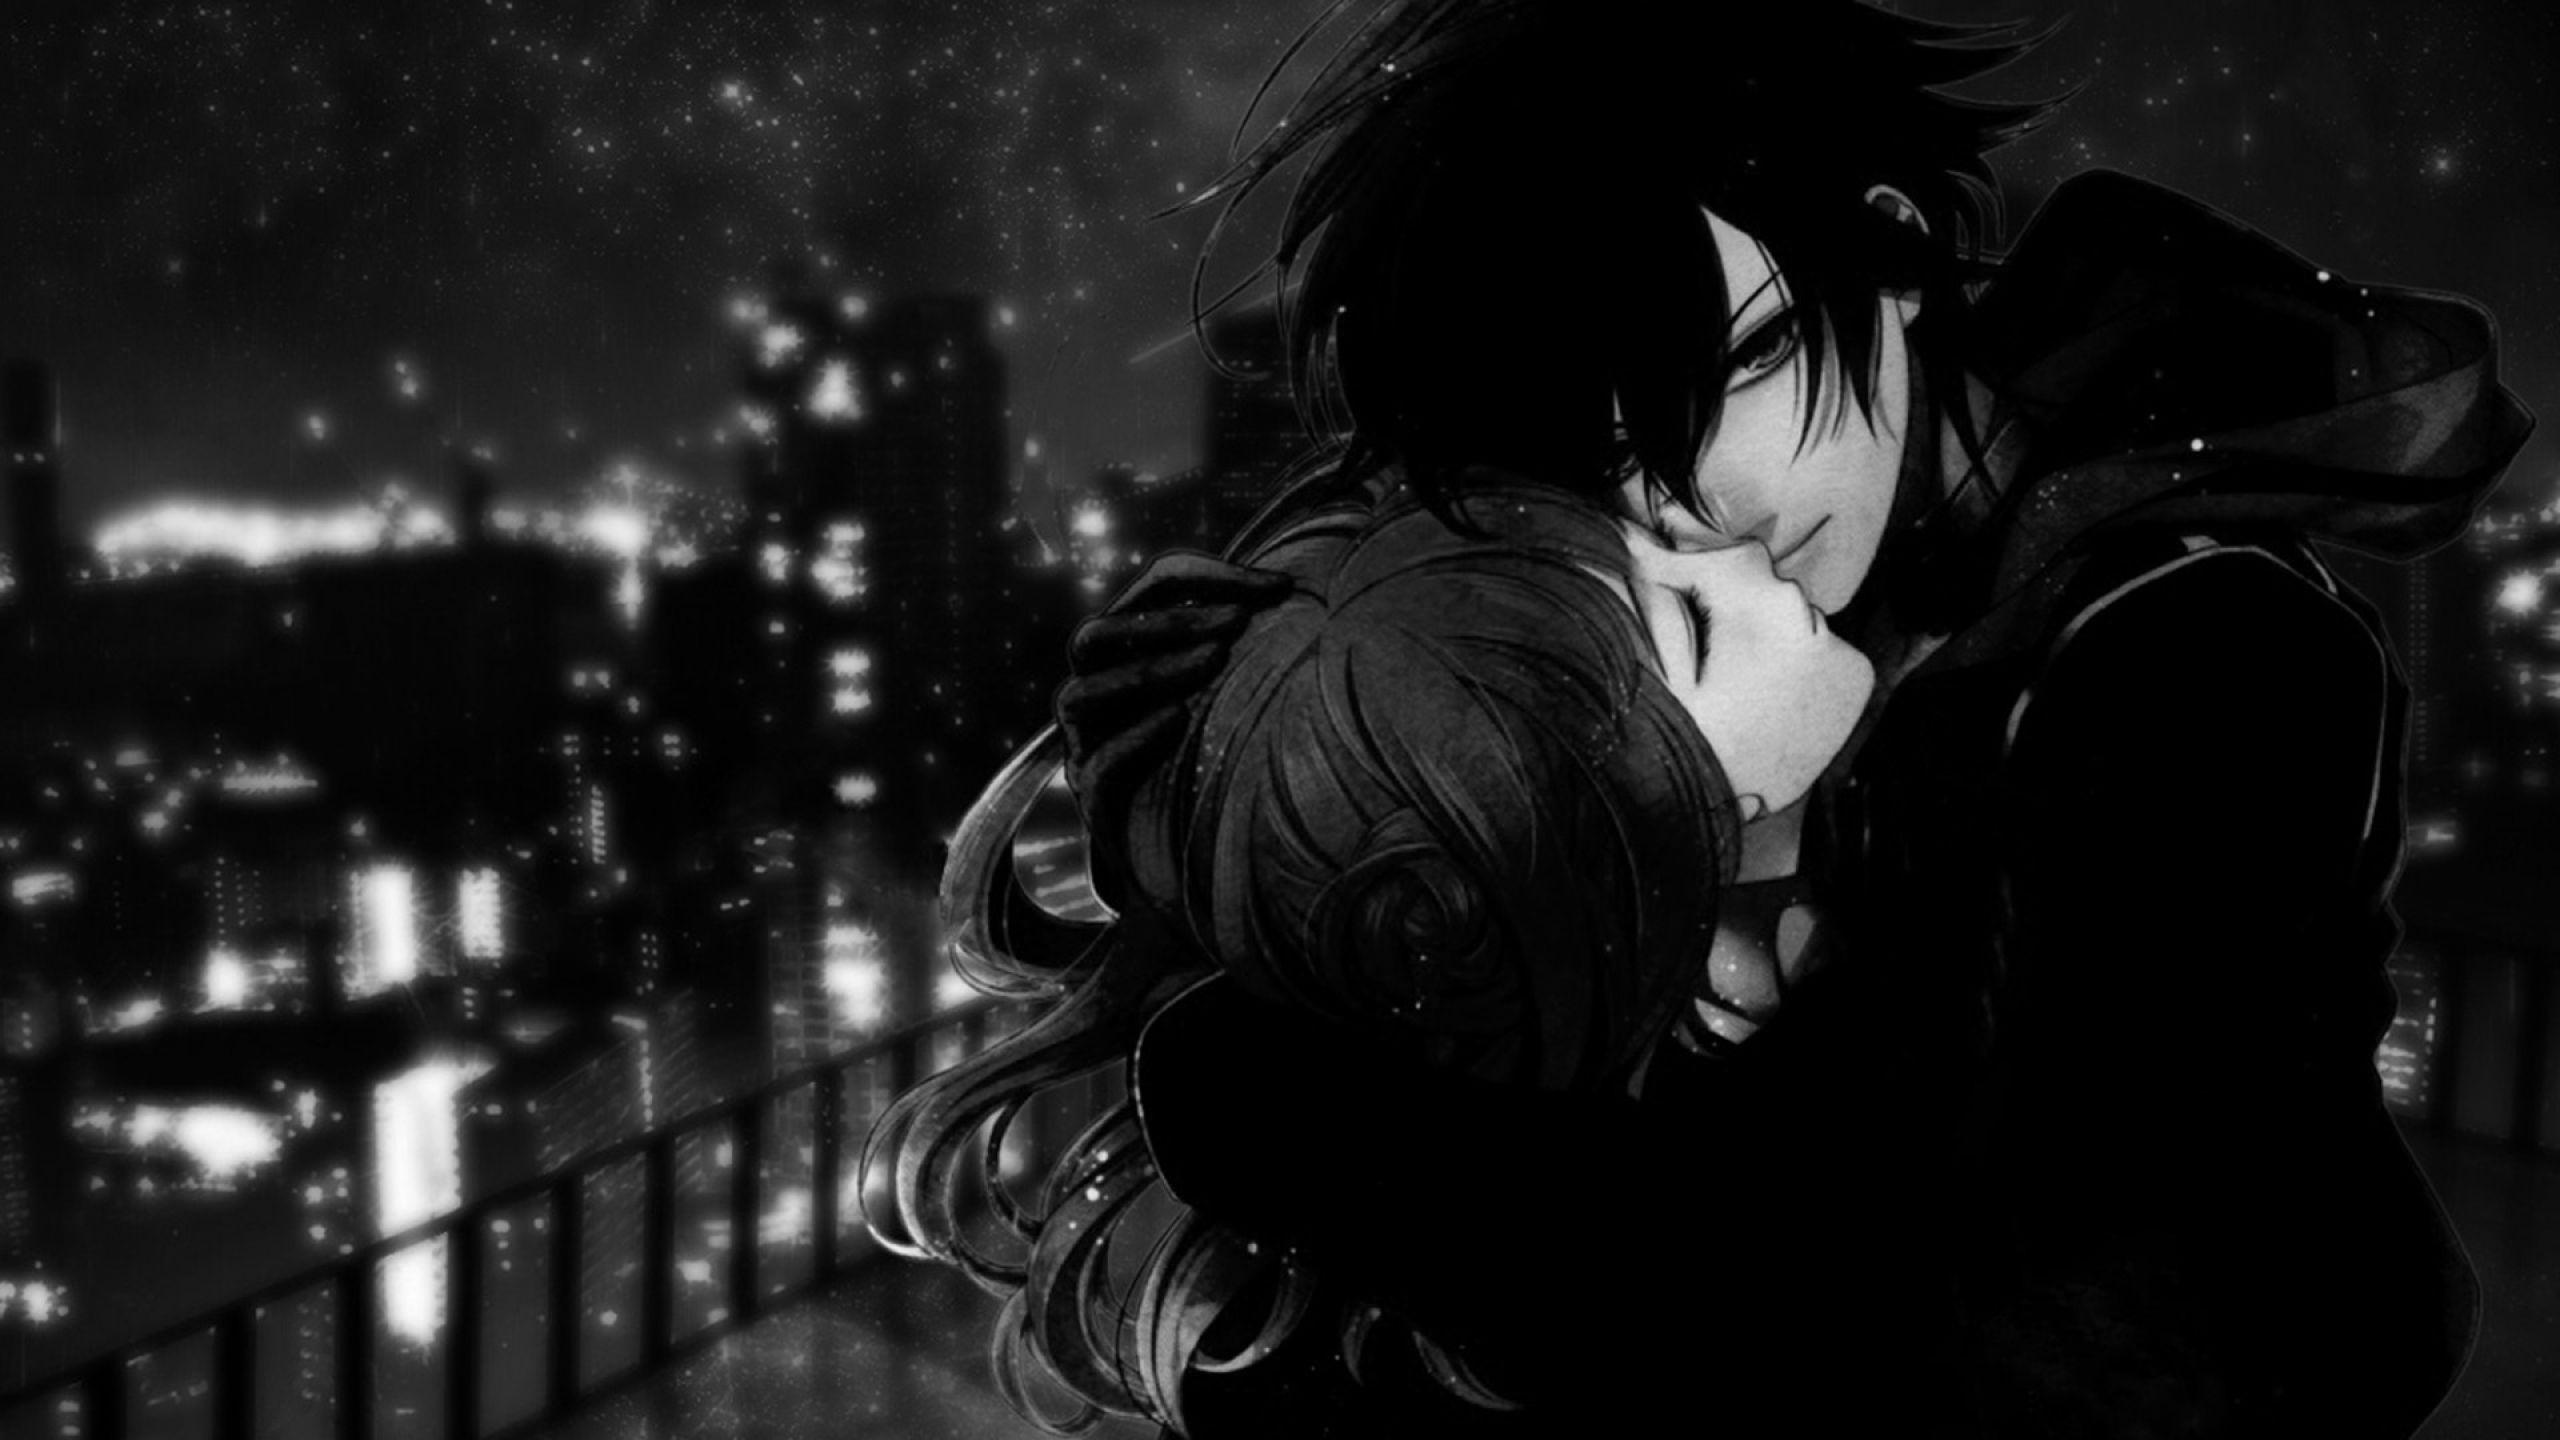 Black and White Anime Wallpapers - Top Free Black and ...